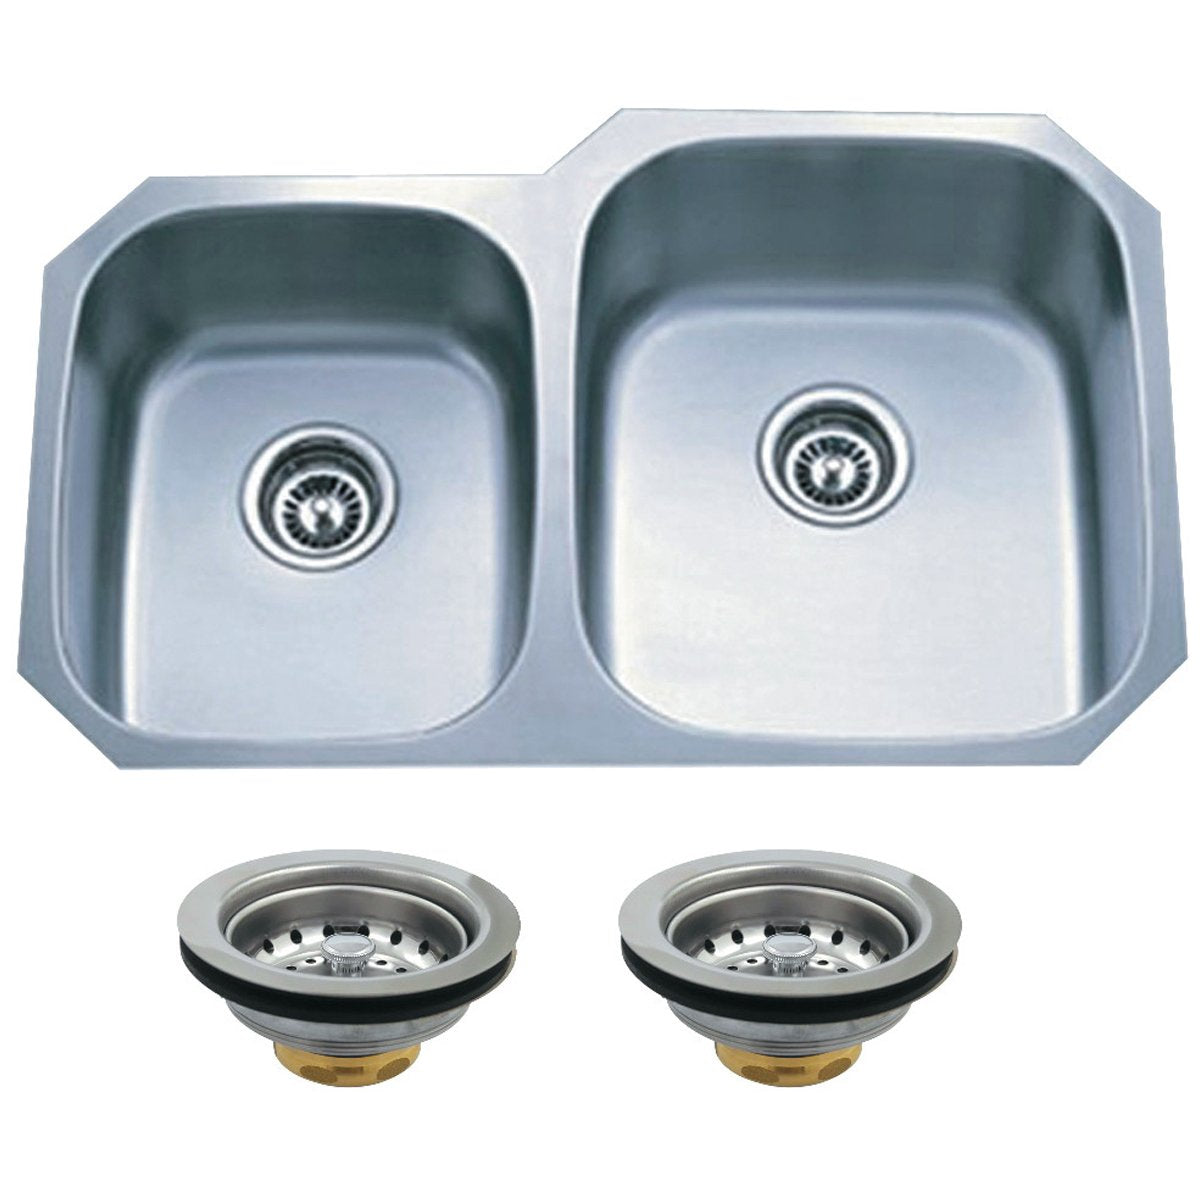 Kingston Brass 31.75" x 20.5" x 9" Undermount Stainless Steel Double Bowl Kitchen Sink Combo with Strainers